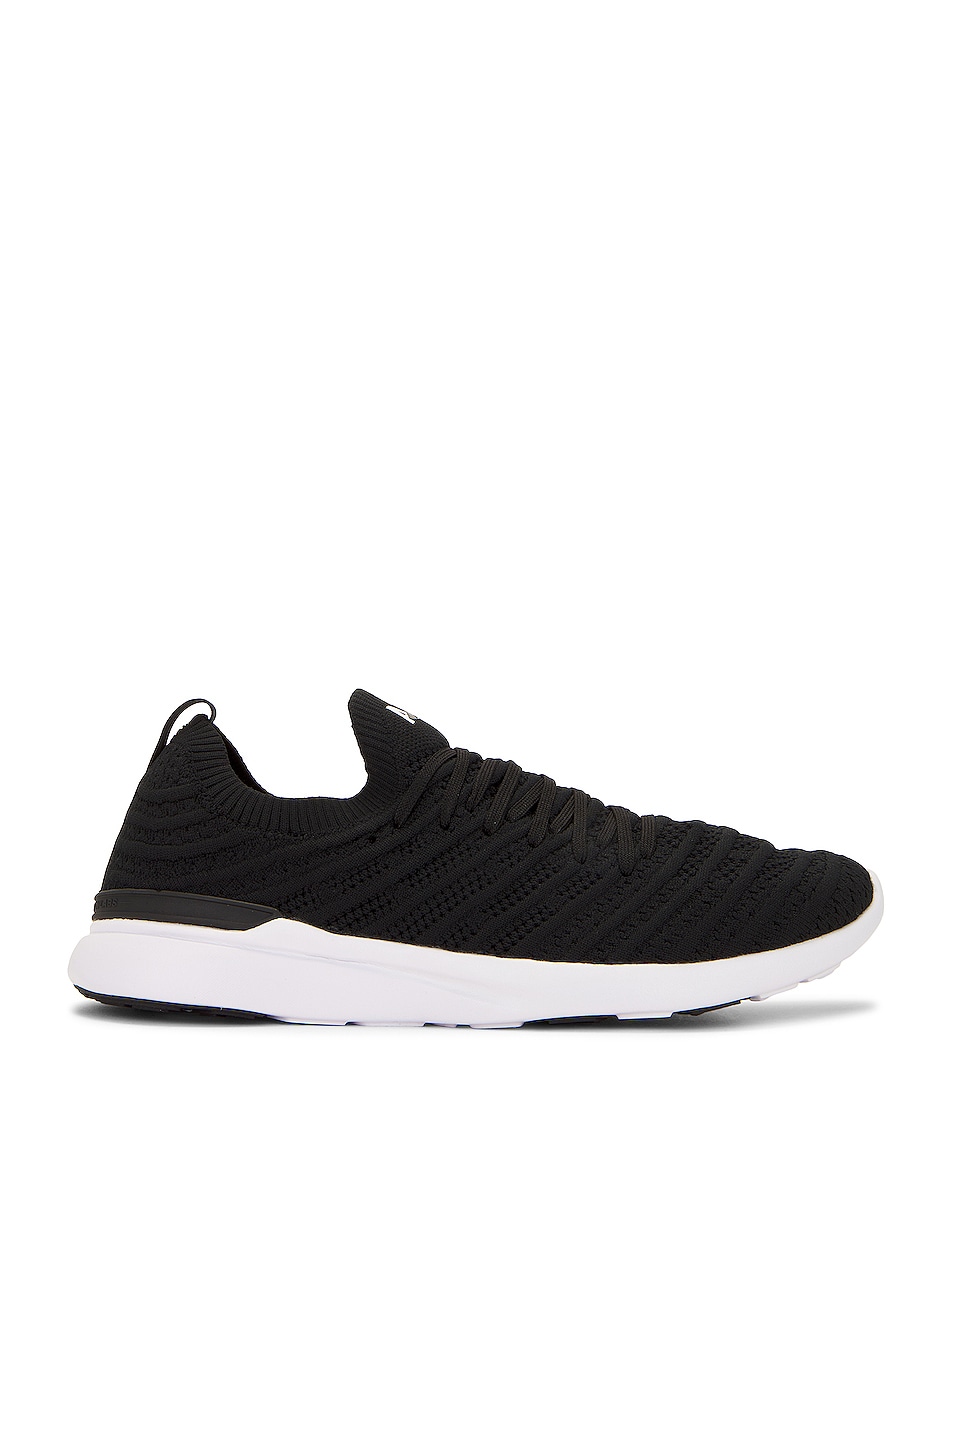 Image 1 of APL: Athletic Propulsion Labs Techloom Wave in Black & White